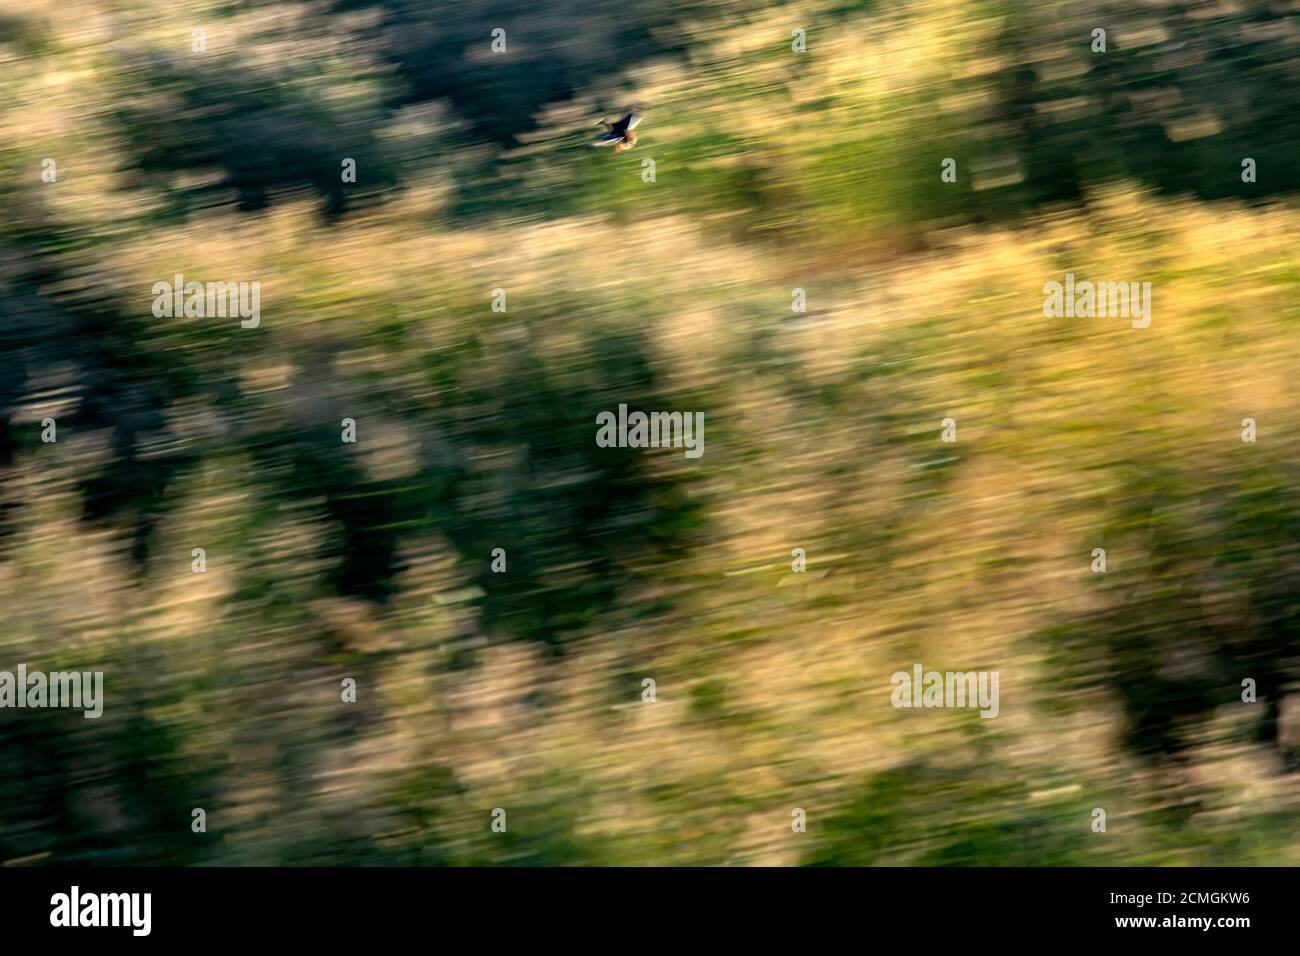 Abstract nature. Flying birds. Motion blur background. Stock Photo